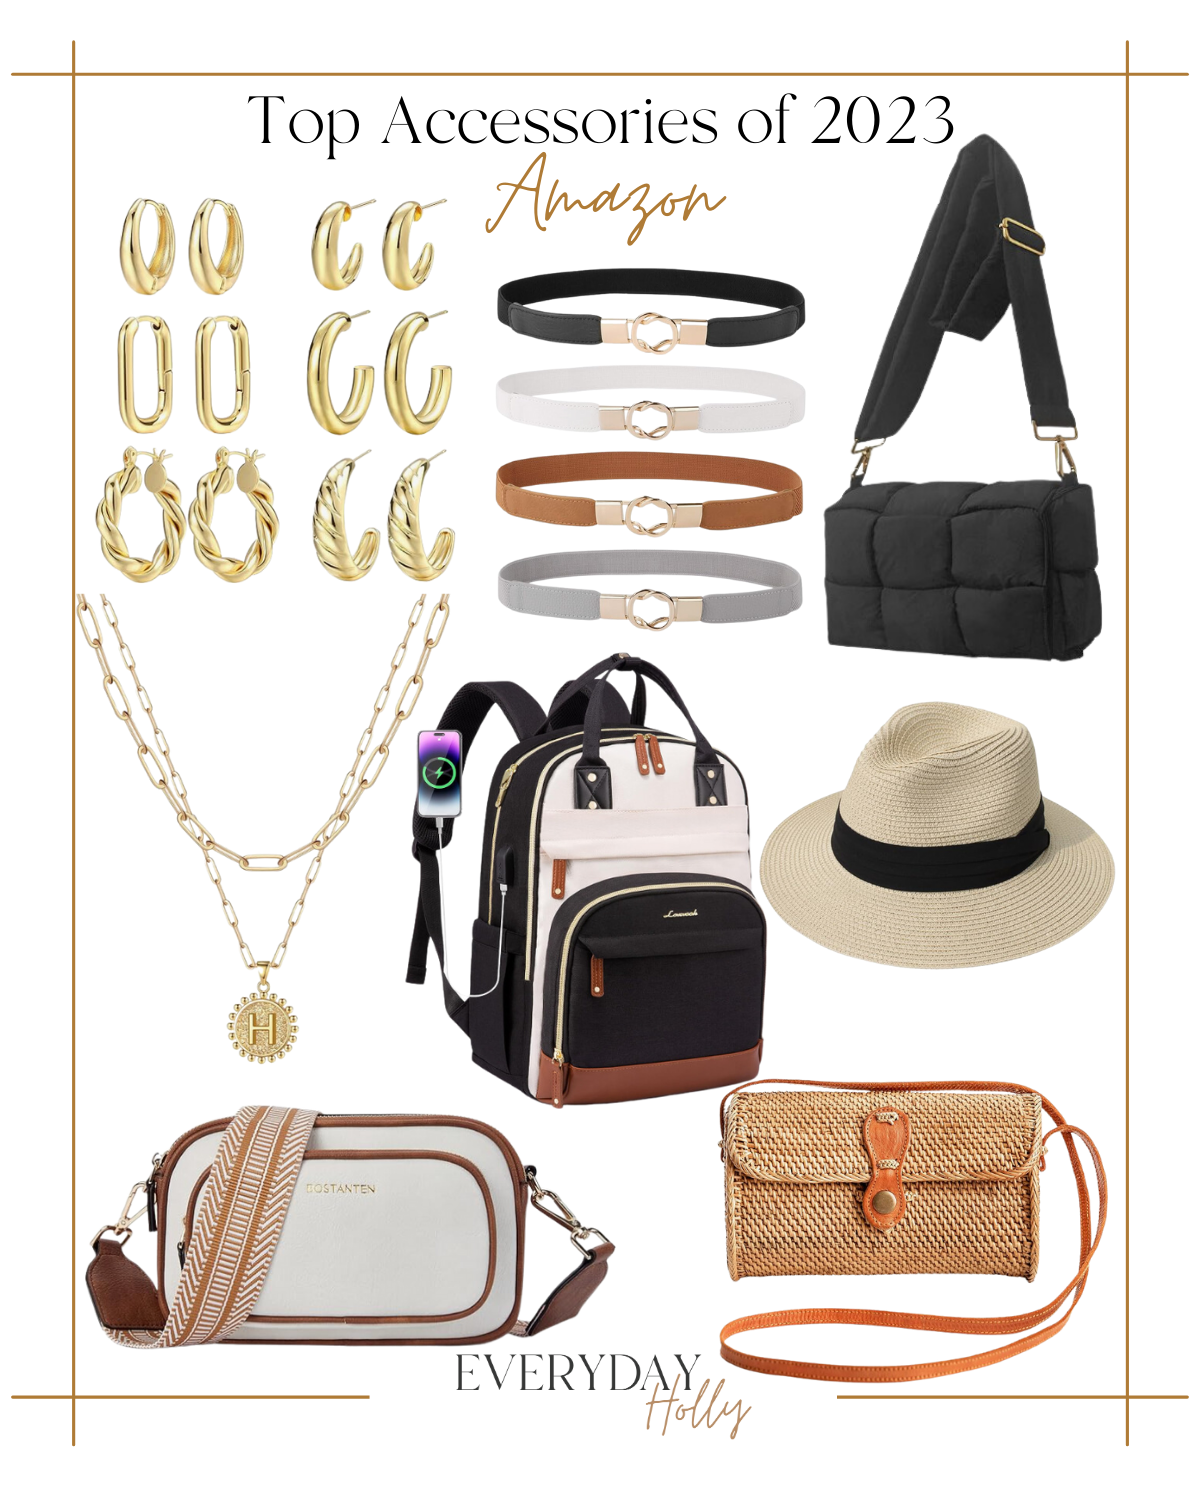 top 23 fashion favorites of 2023 | top 23 of 2023, fashion, fashion favorites, fashion finds, outfit inspo, accessories, jewelry, handbag, purse, backpack, hat, rattan, vacation